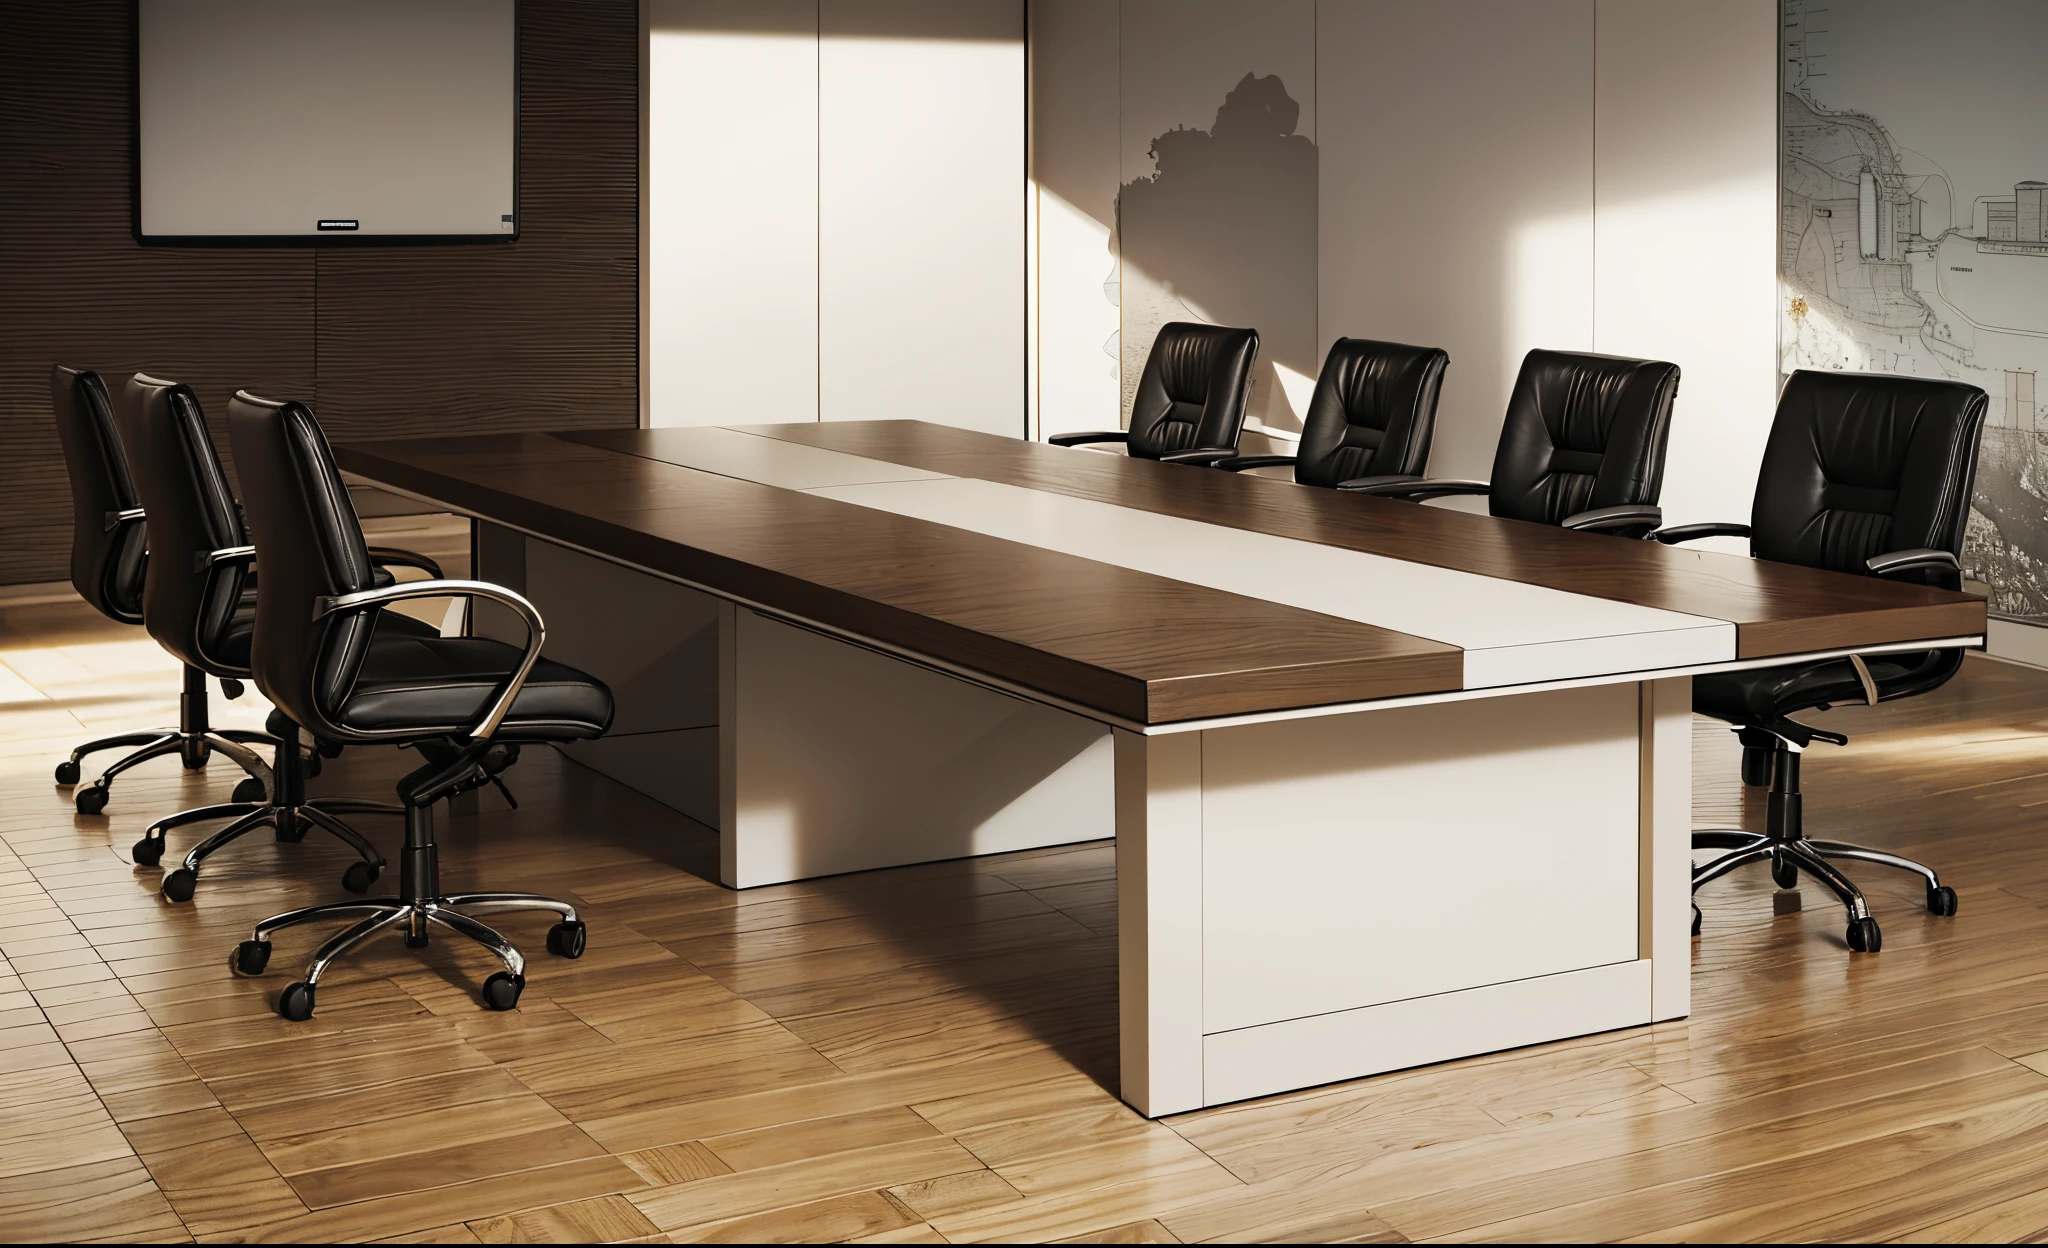 there is a large conference table with chairs and a flat screen tv, office furniture, in a meeting room, tables, cubical meeting room office, meeting room, desks, center focus on table, ready for a meeting, big desk, table, a hyper realistic, modern office, with sleek lines and a powerful, table is centered, motivational, on a desk, offices